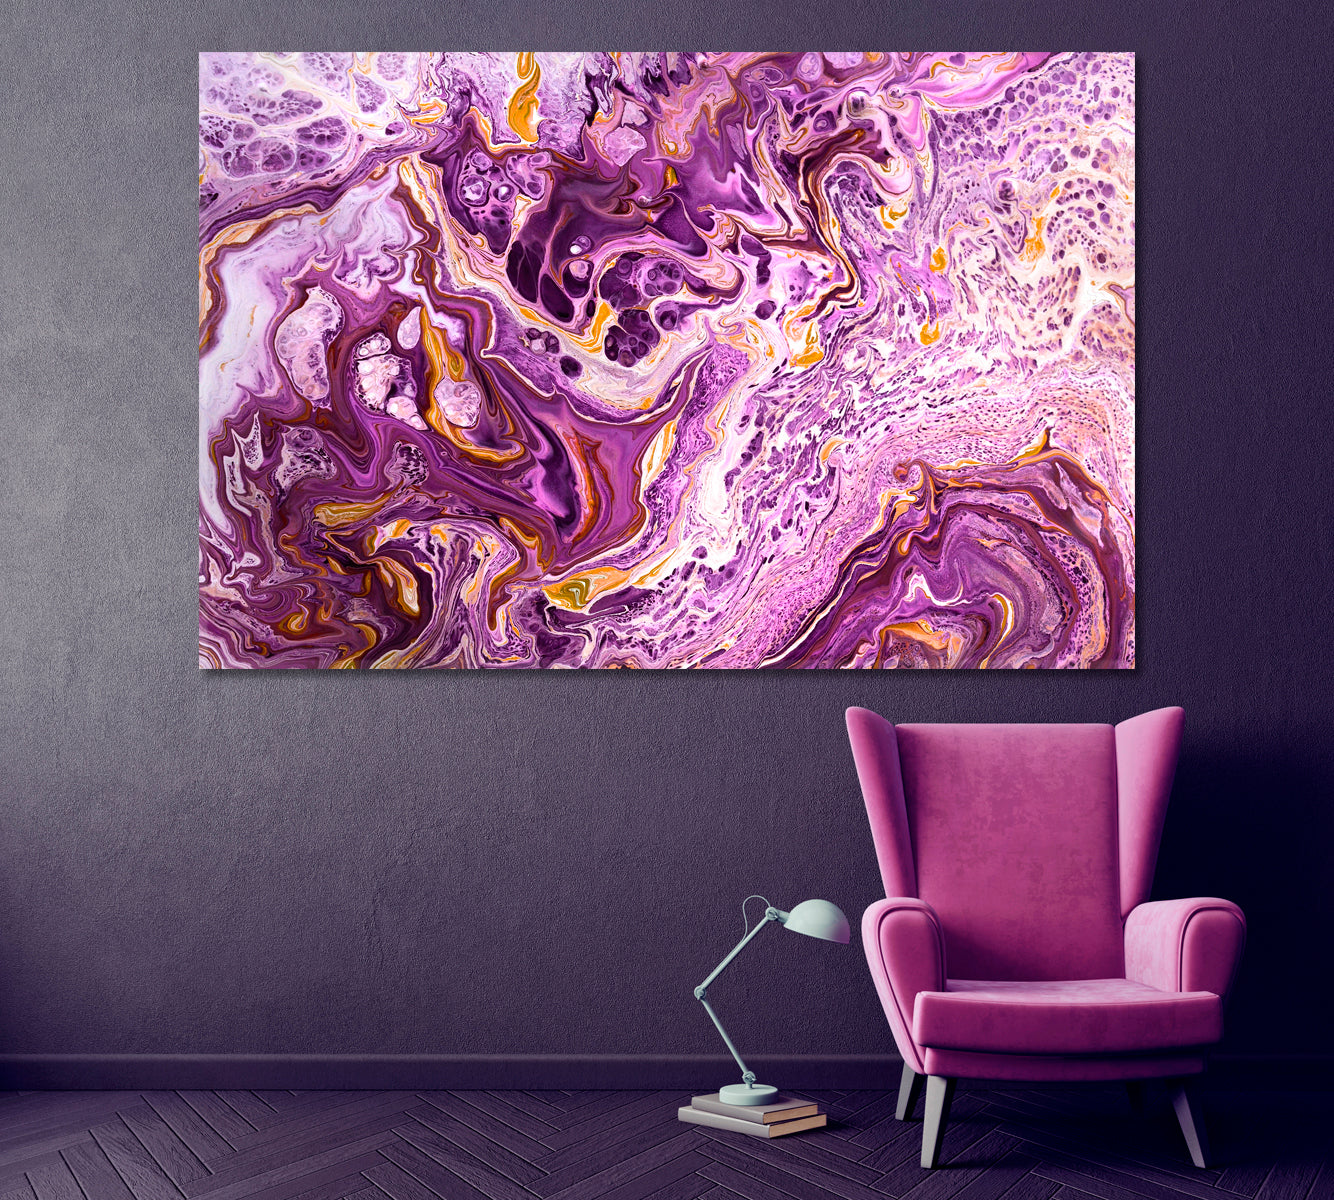 Abstract Purple Liquid Pattern Canvas Print ArtLexy 1 Panel 24"x16" inches 